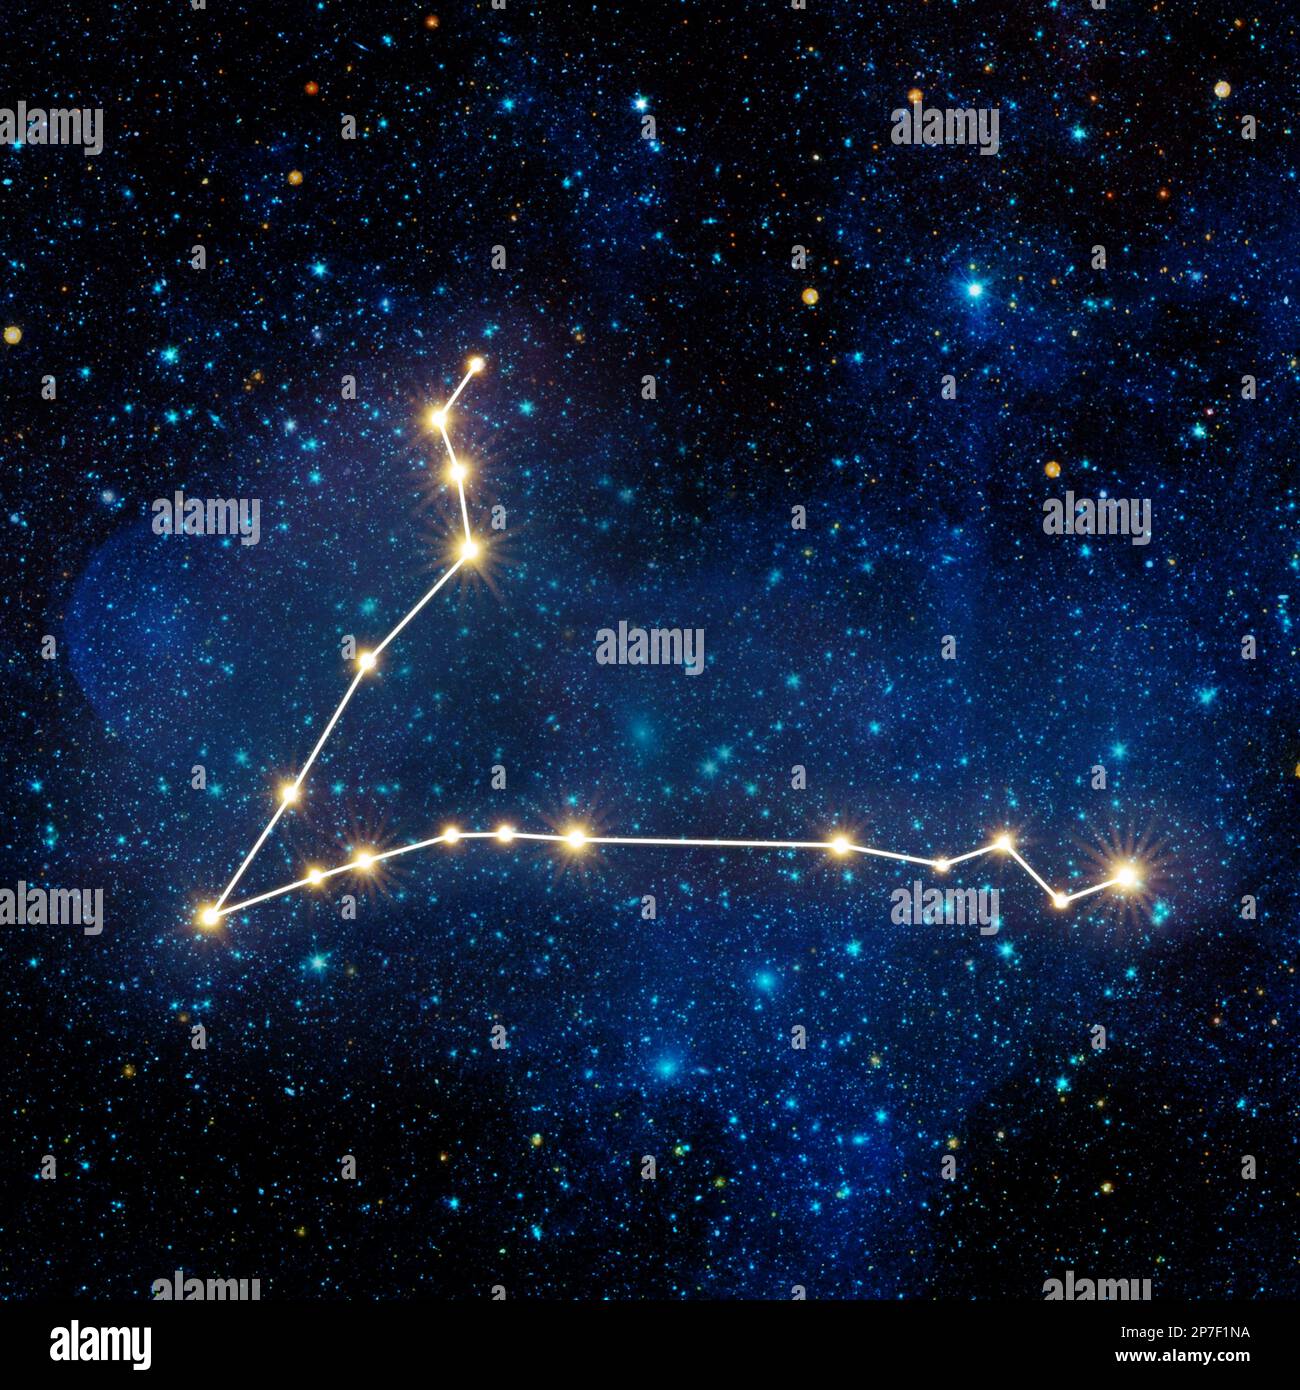 pisces constellation stars twinkling and shining in clear night sky, some elements of this image were furnished by NASA, astrology and horoscopes conc Stock Photo